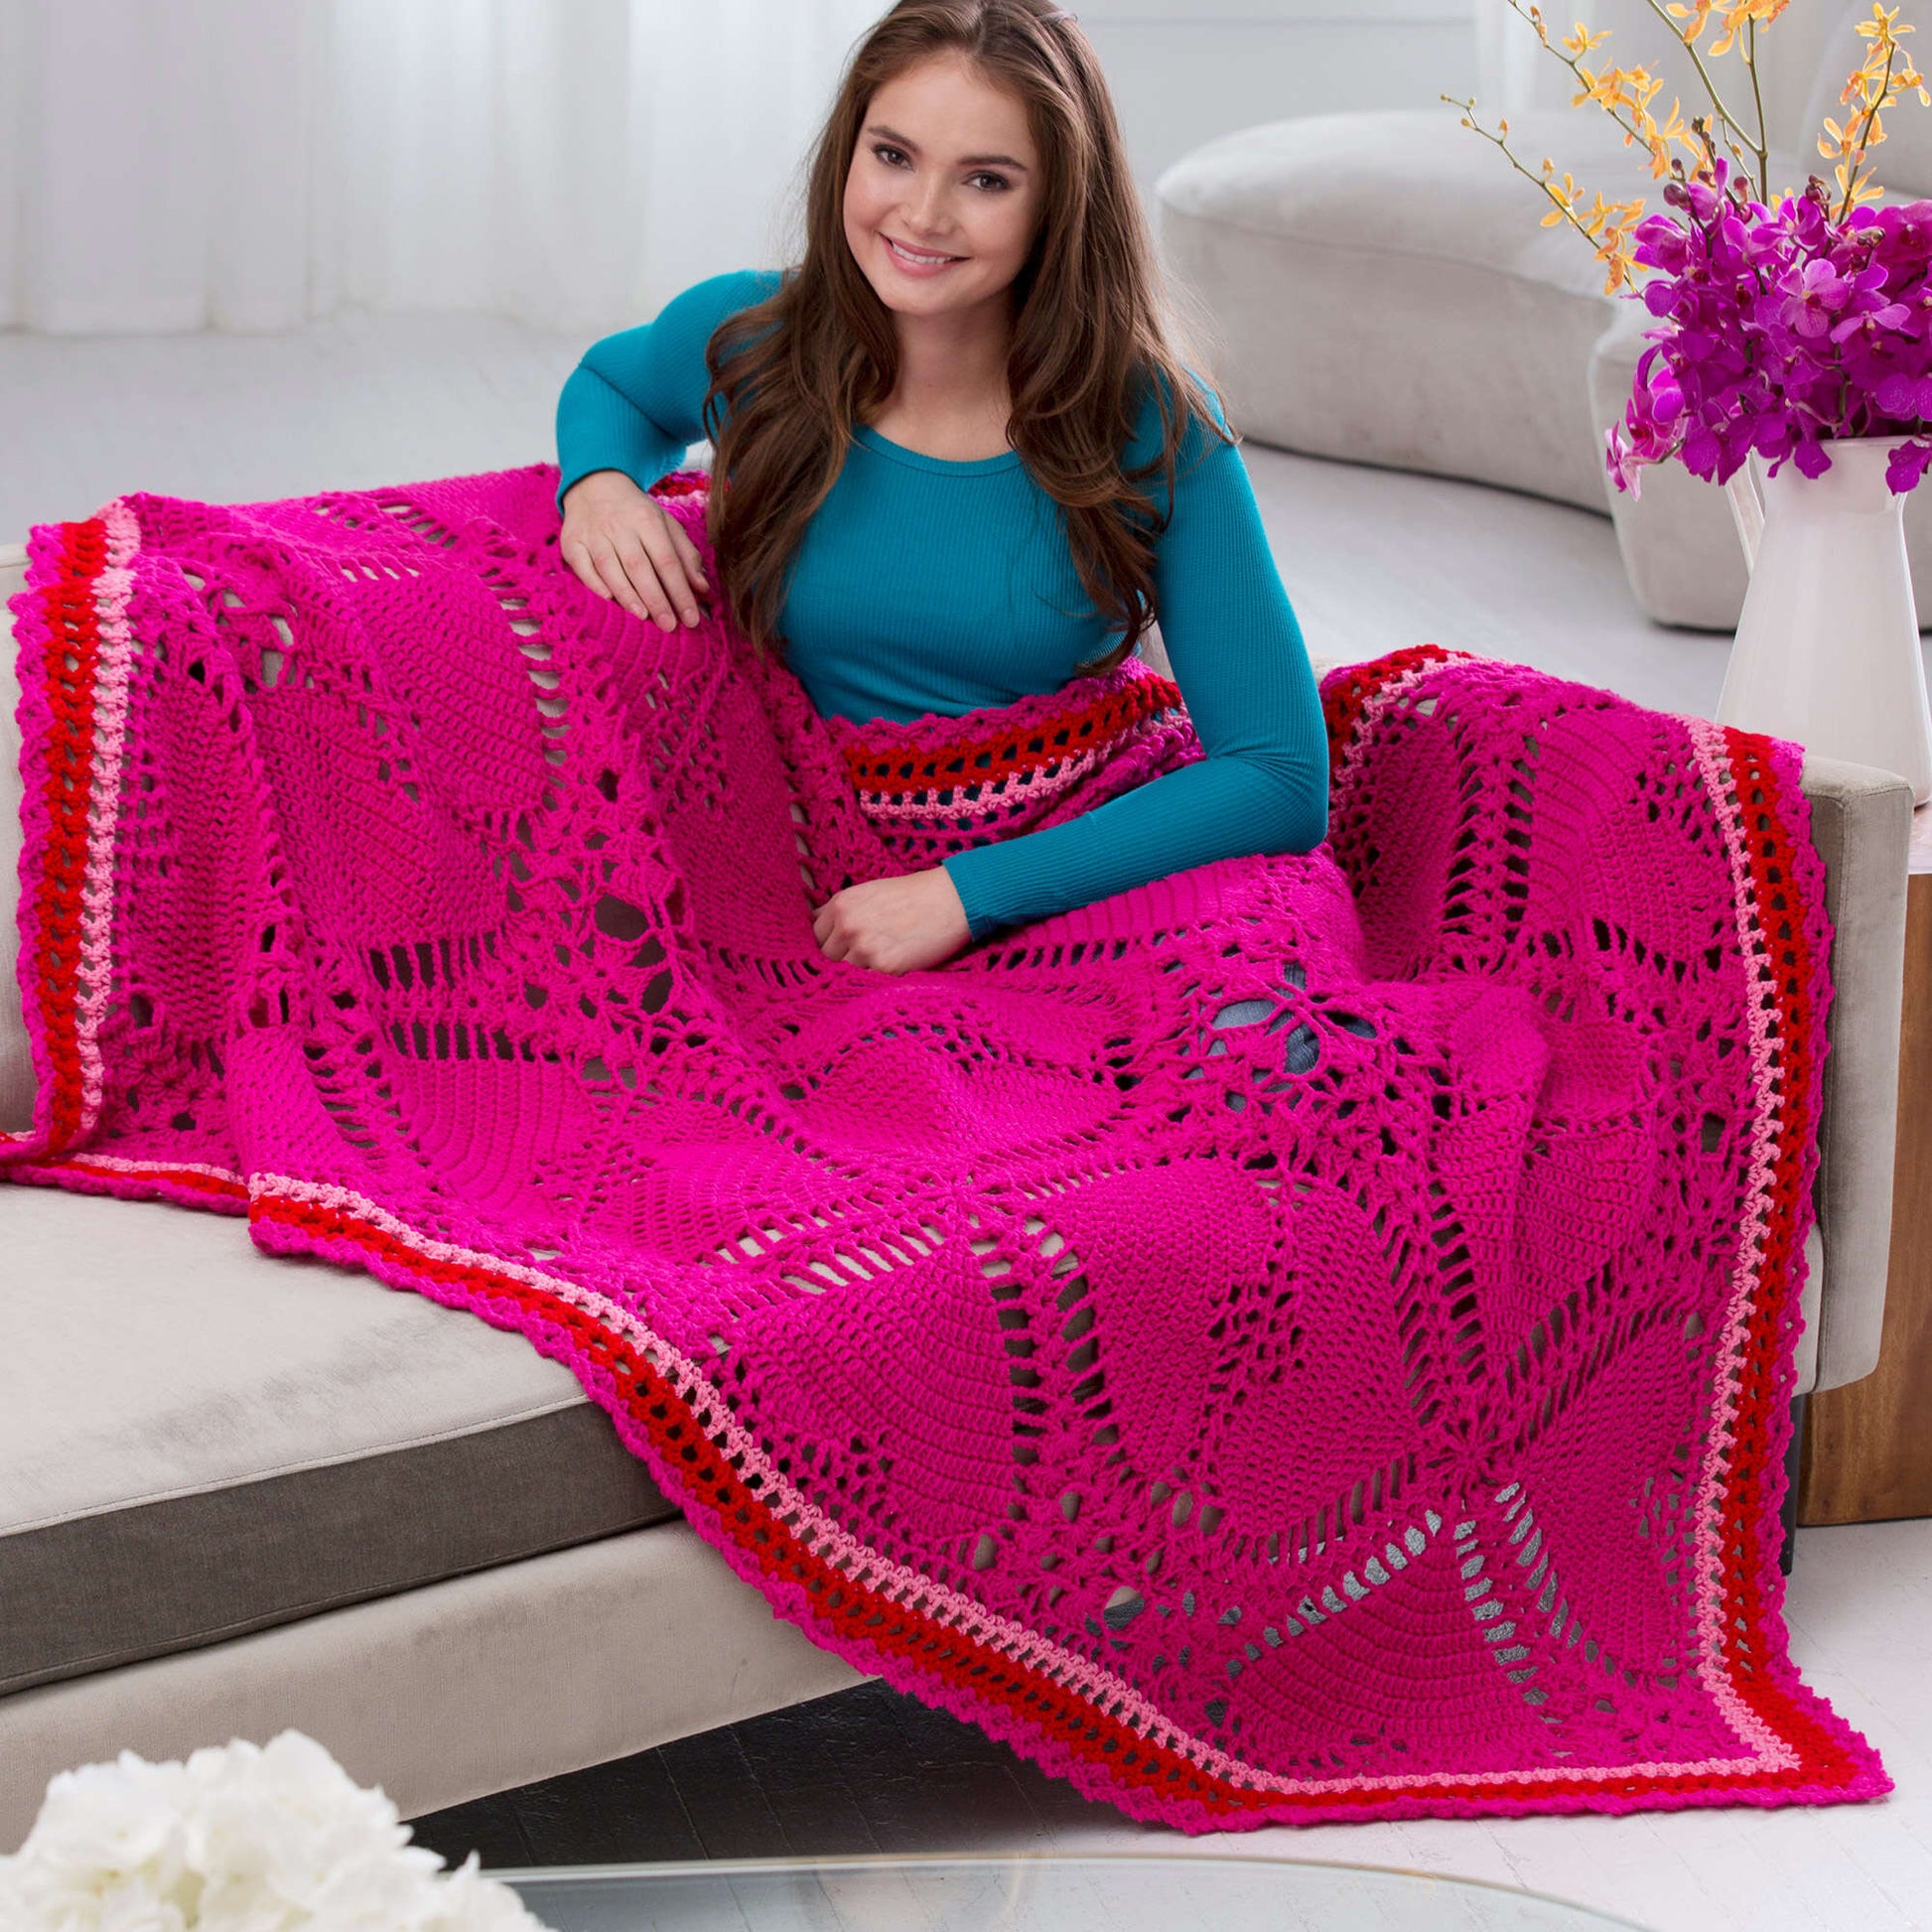 Free Red Heart Crochet Lovely Hearts Throw Pattern